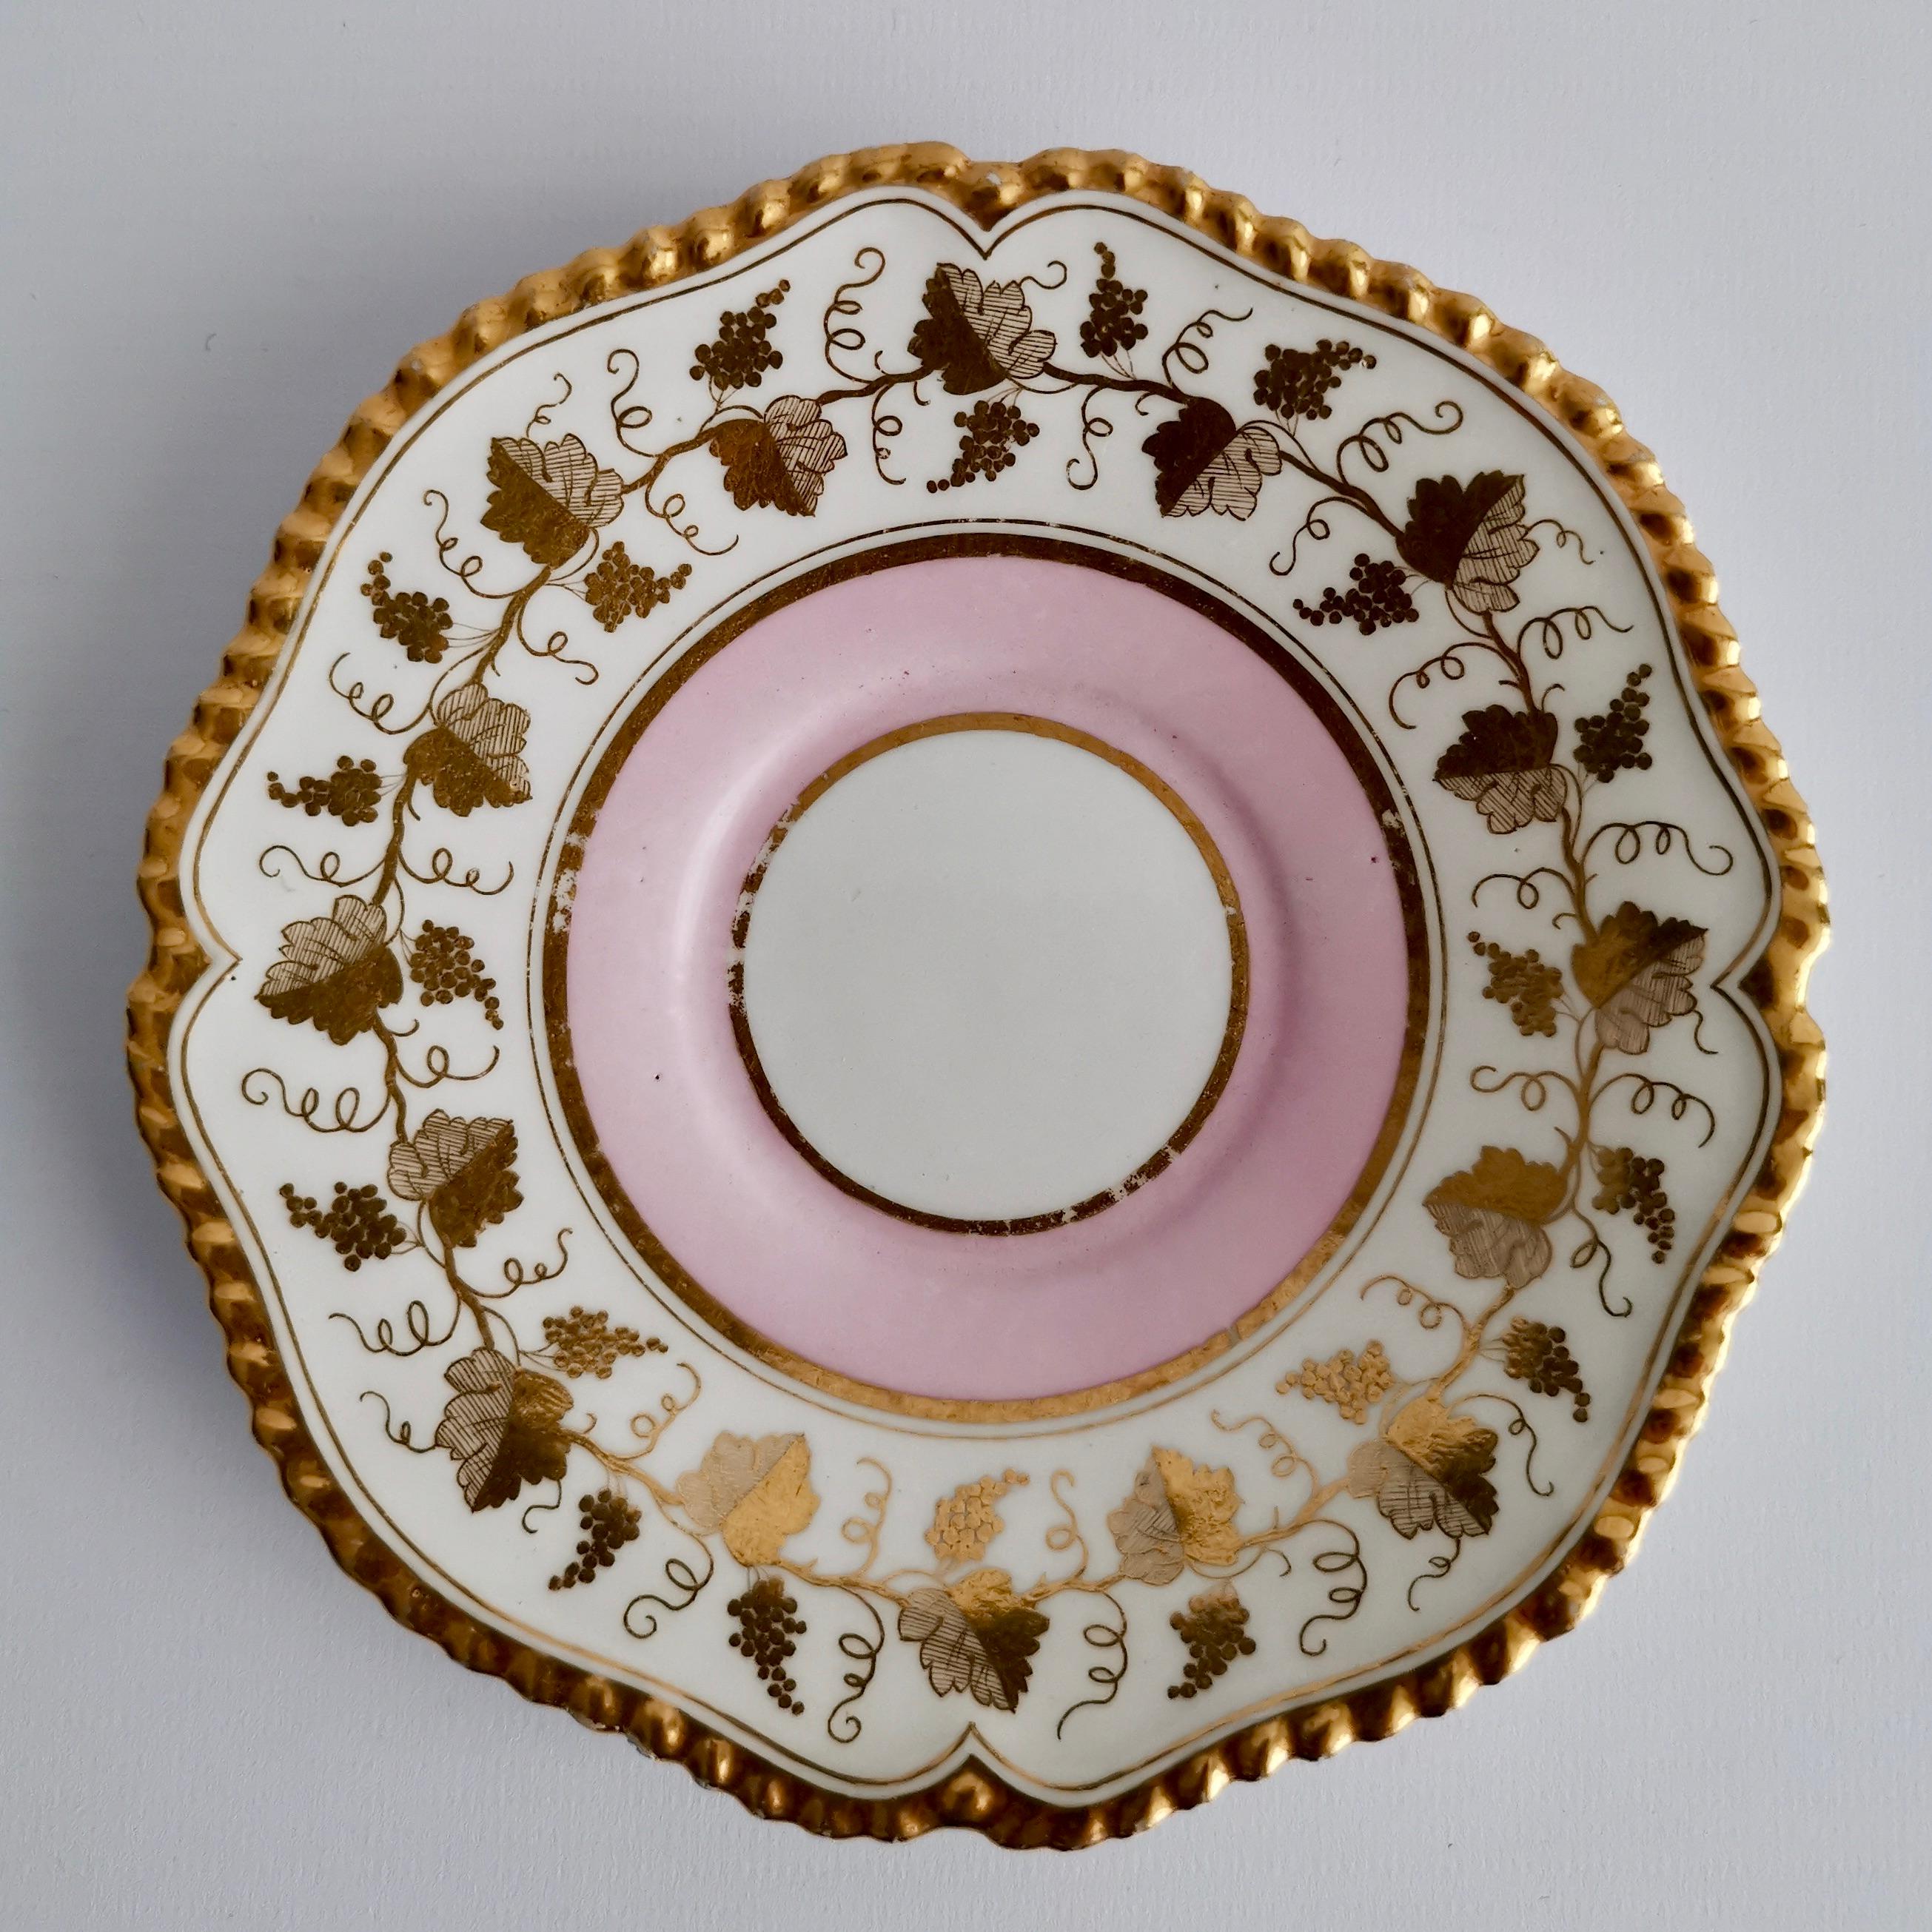 Early 19th Century Flight Barr & Barr Teacup Trio, Pink with Gilt Vines, 1815-1820